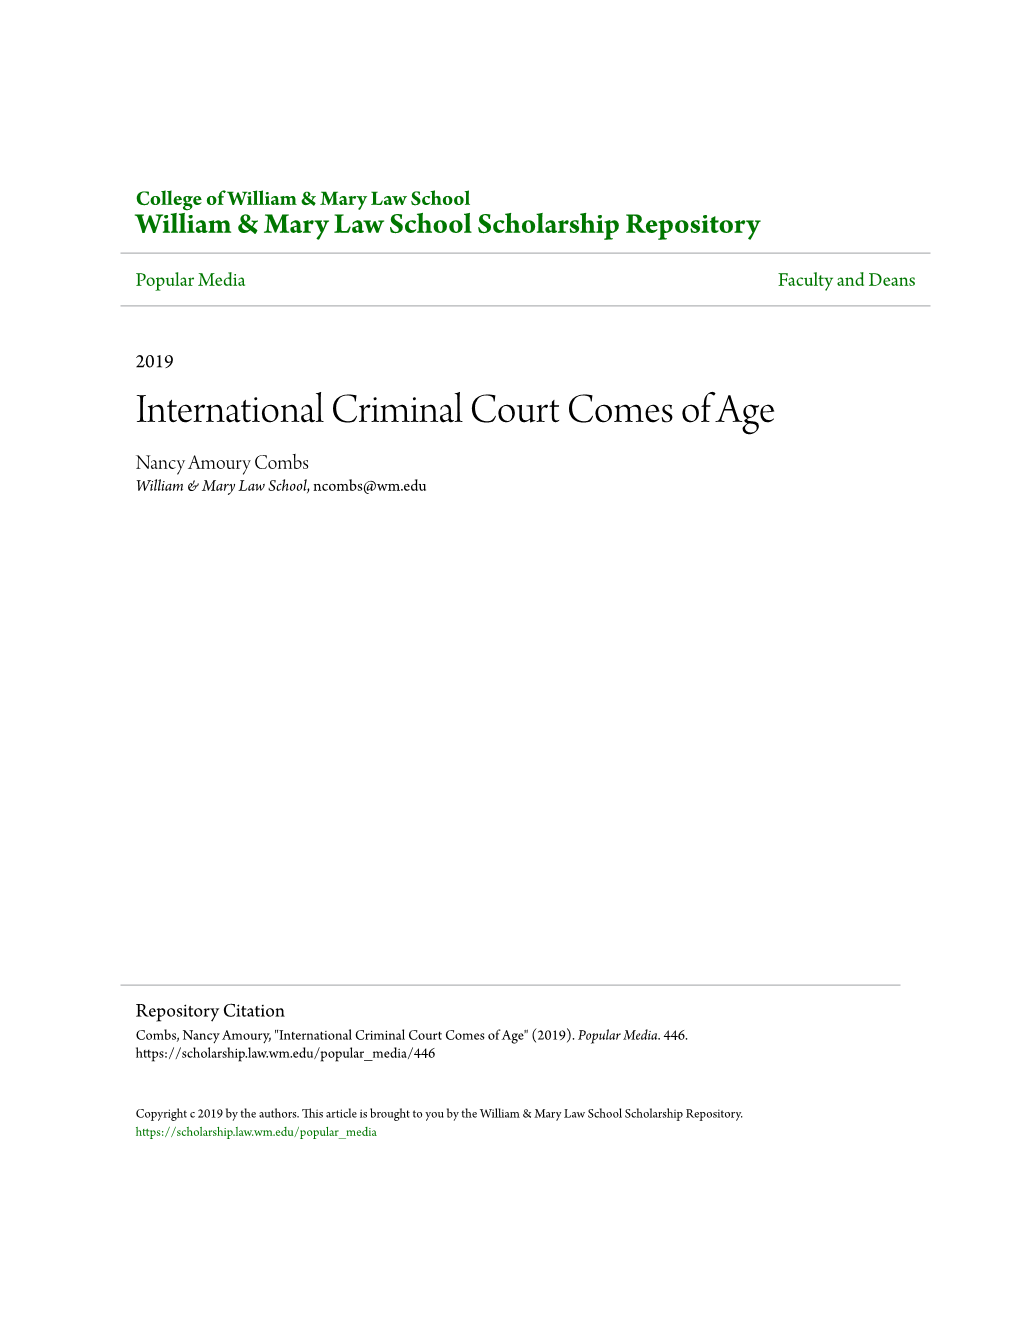 International Criminal Court Comes of Age Nancy Amoury Combs William & Mary Law School, Ncombs@Wm.Edu